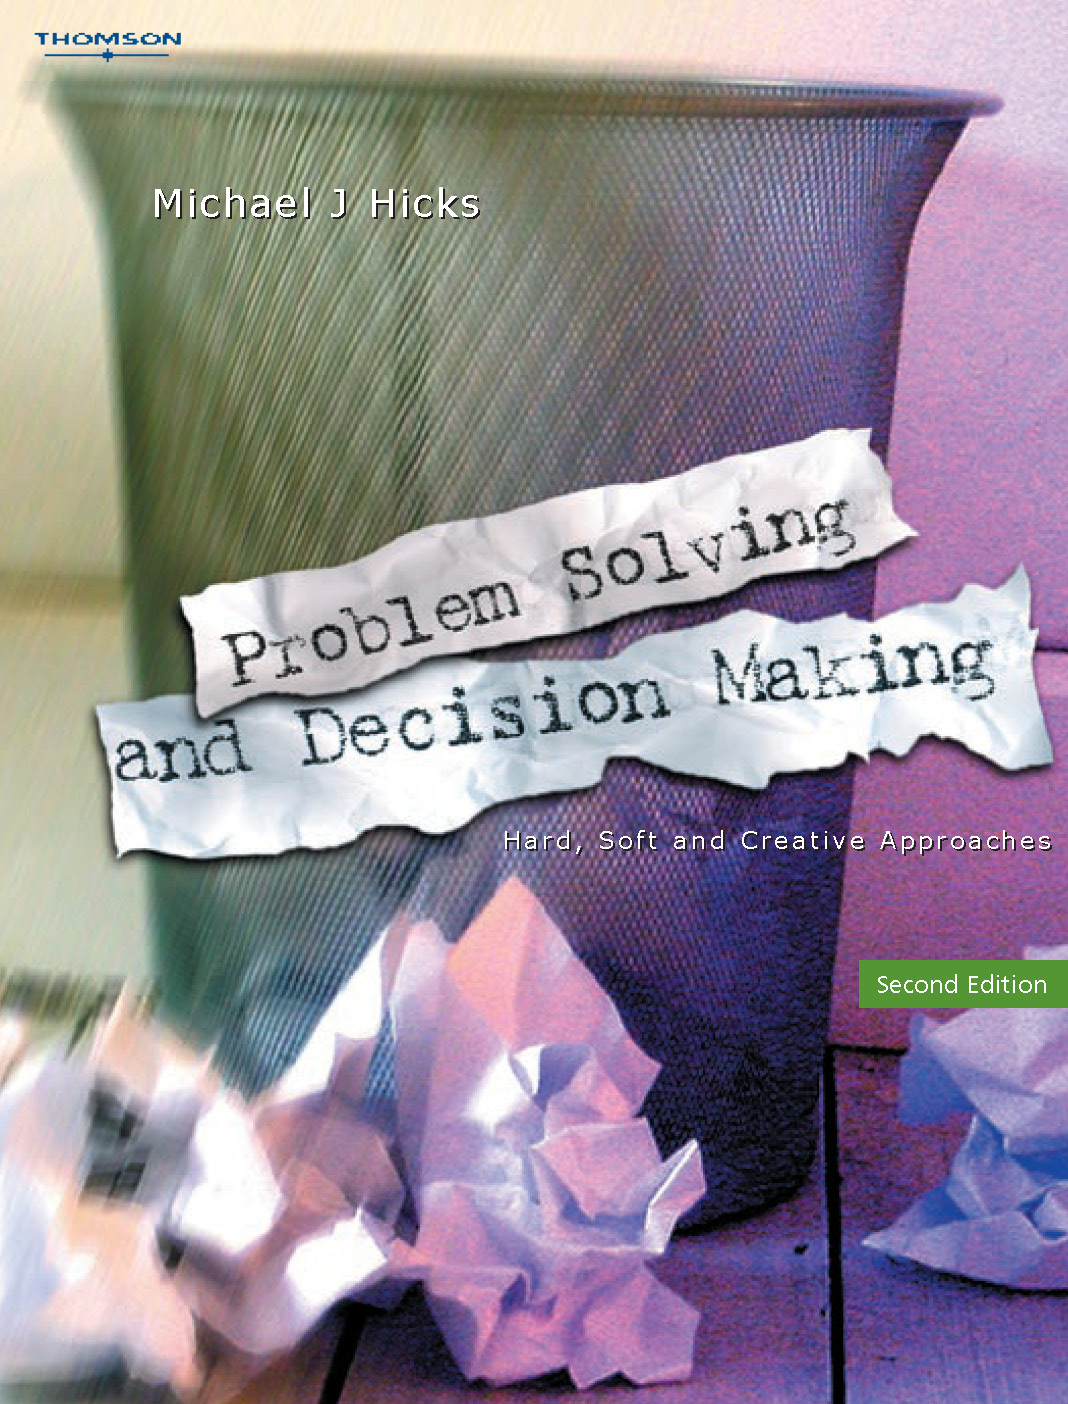 problem solving and decision making book pdf